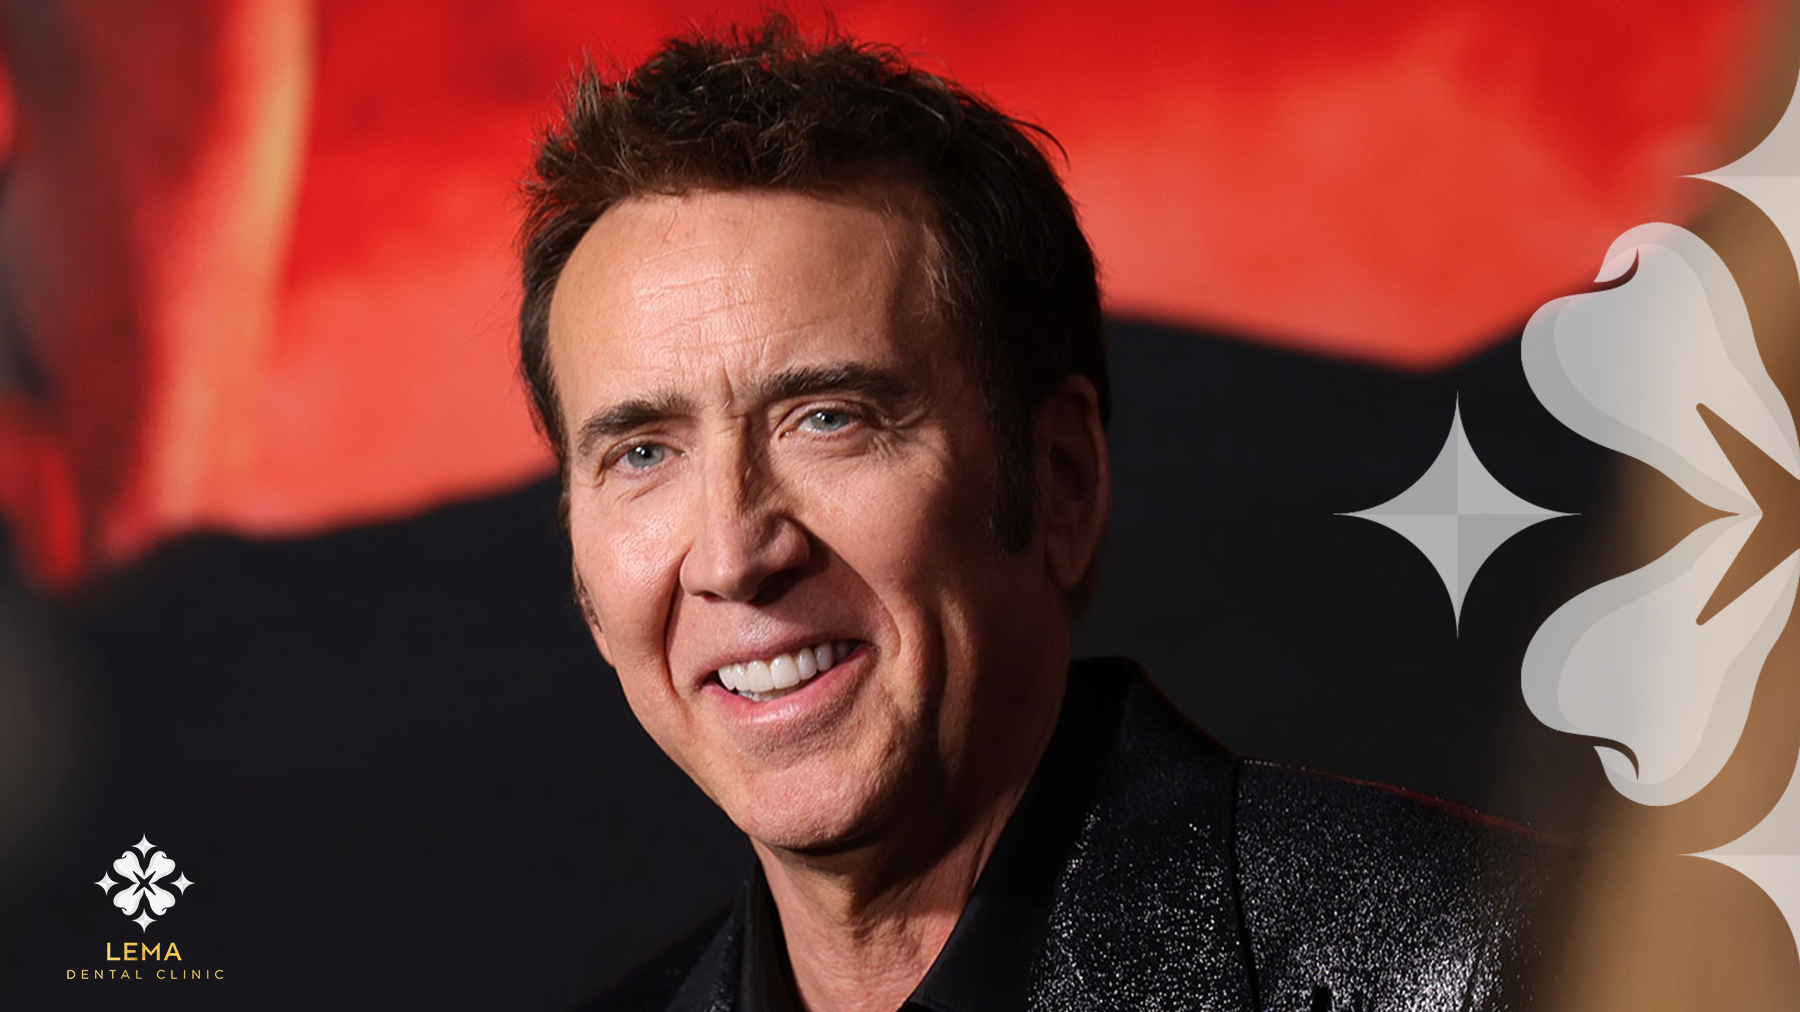 Nicolas Cage's teeth makeover before after